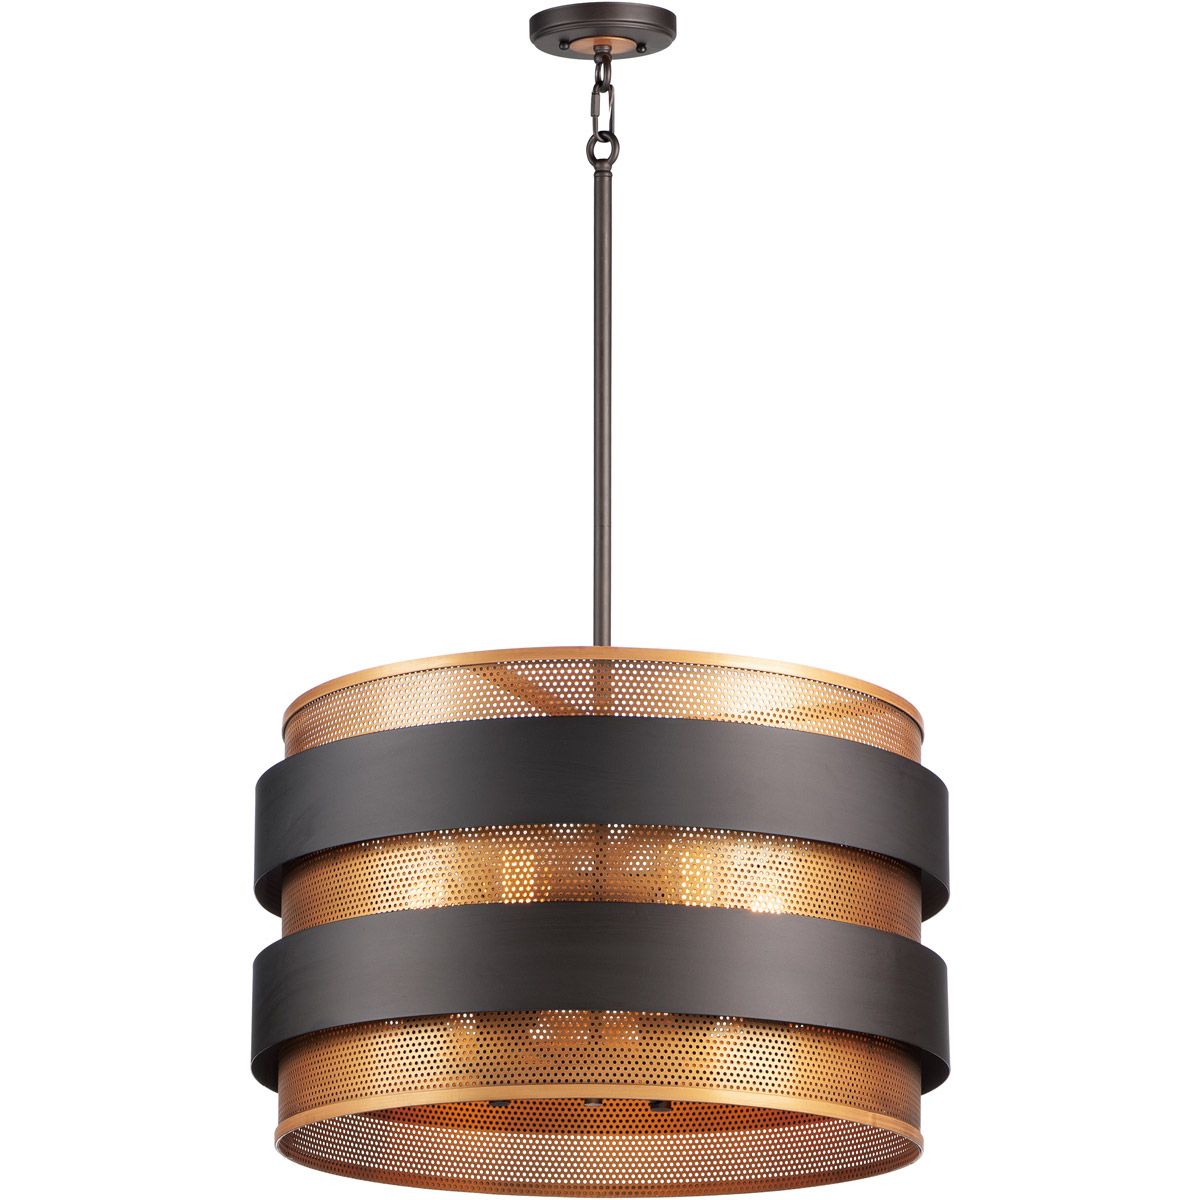 Most Popular Maxim Lighting 31205oiab Caspian Pendant Oil Rubbed Bronze In Oil Rubbed Bronze And Antique Brass Four Light Chandeliers (View 5 of 20)